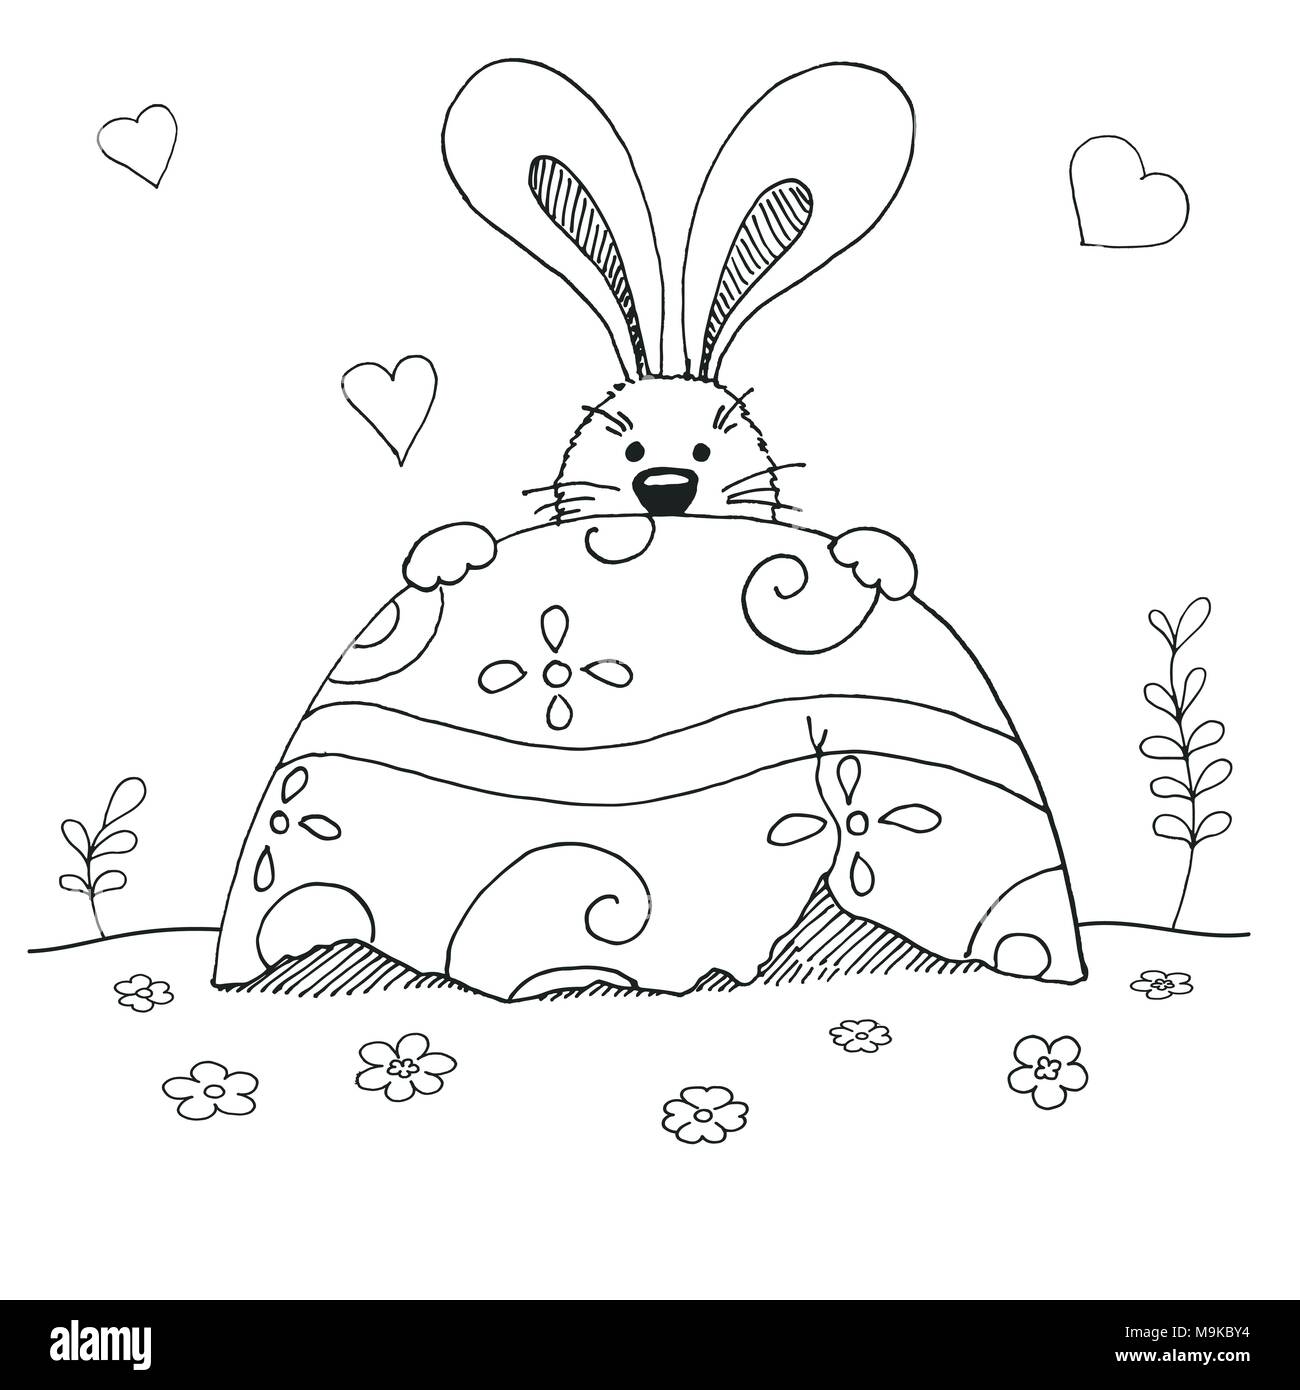 Sketch Of Easter Bunny And Easter Egg Vector Happy Easter Stock  Illustration - Download Image Now - iStock